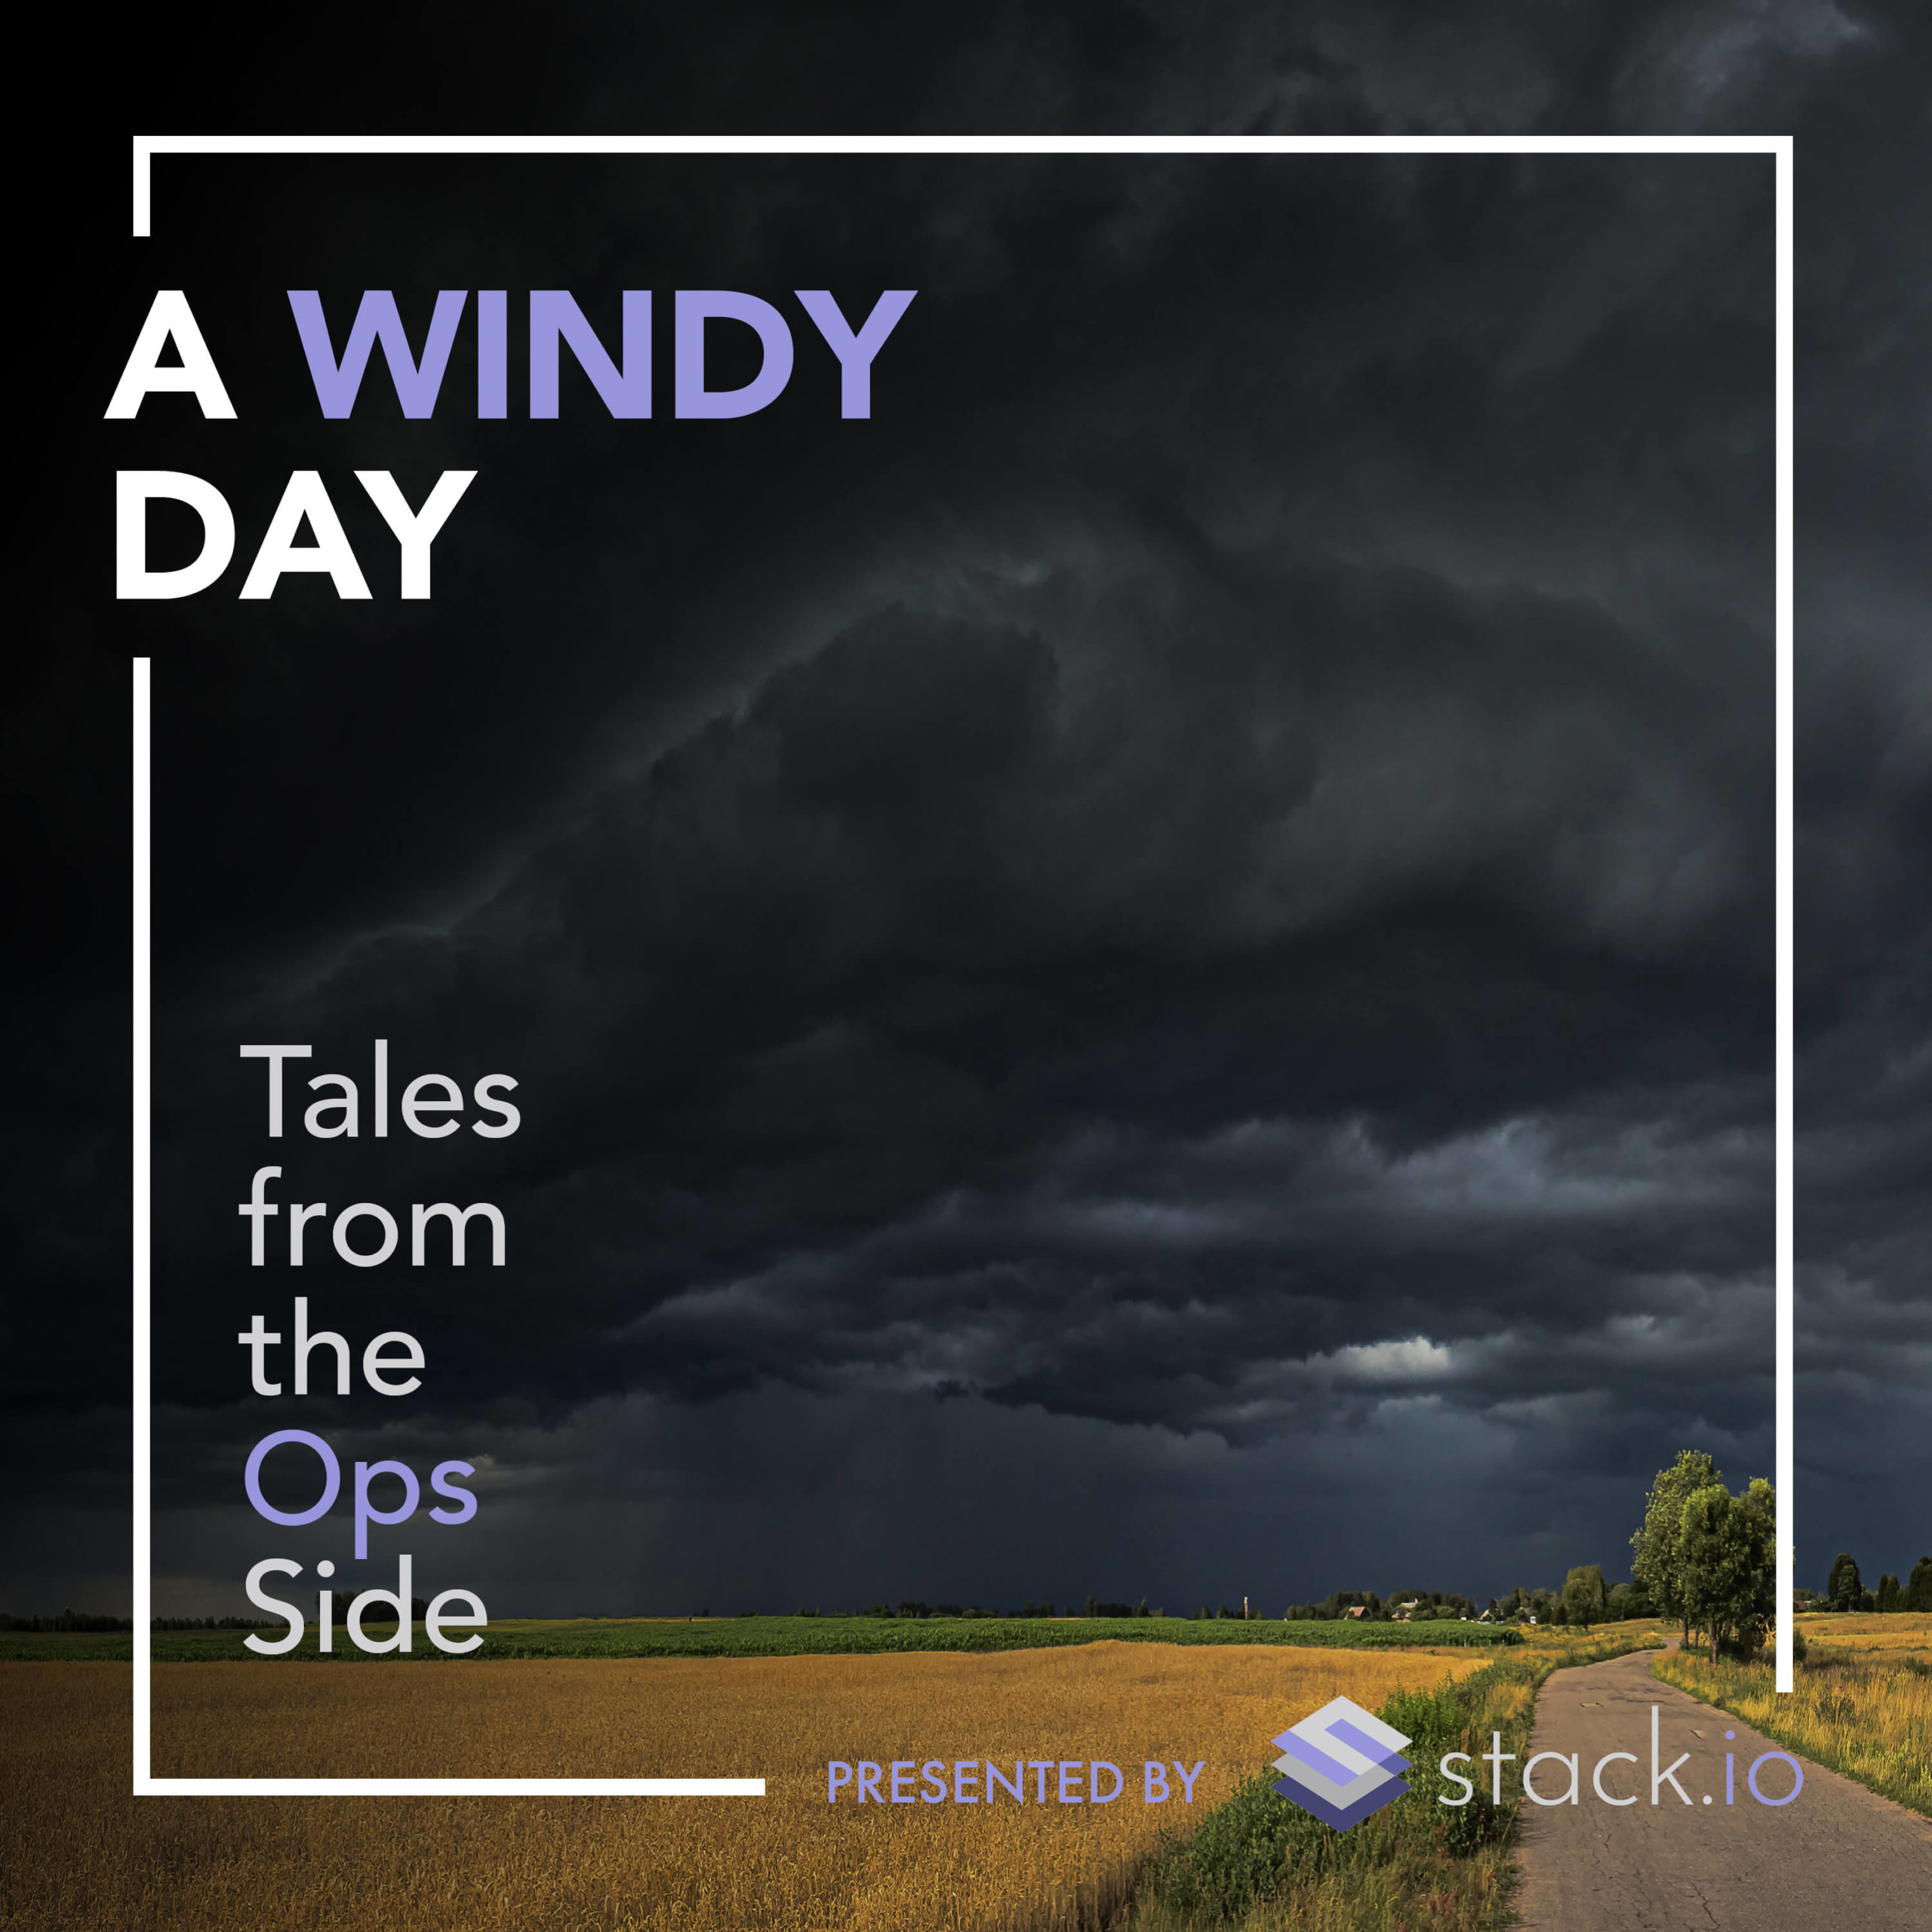 Tales from the Ops Side - Episode 05 - A Windy Day